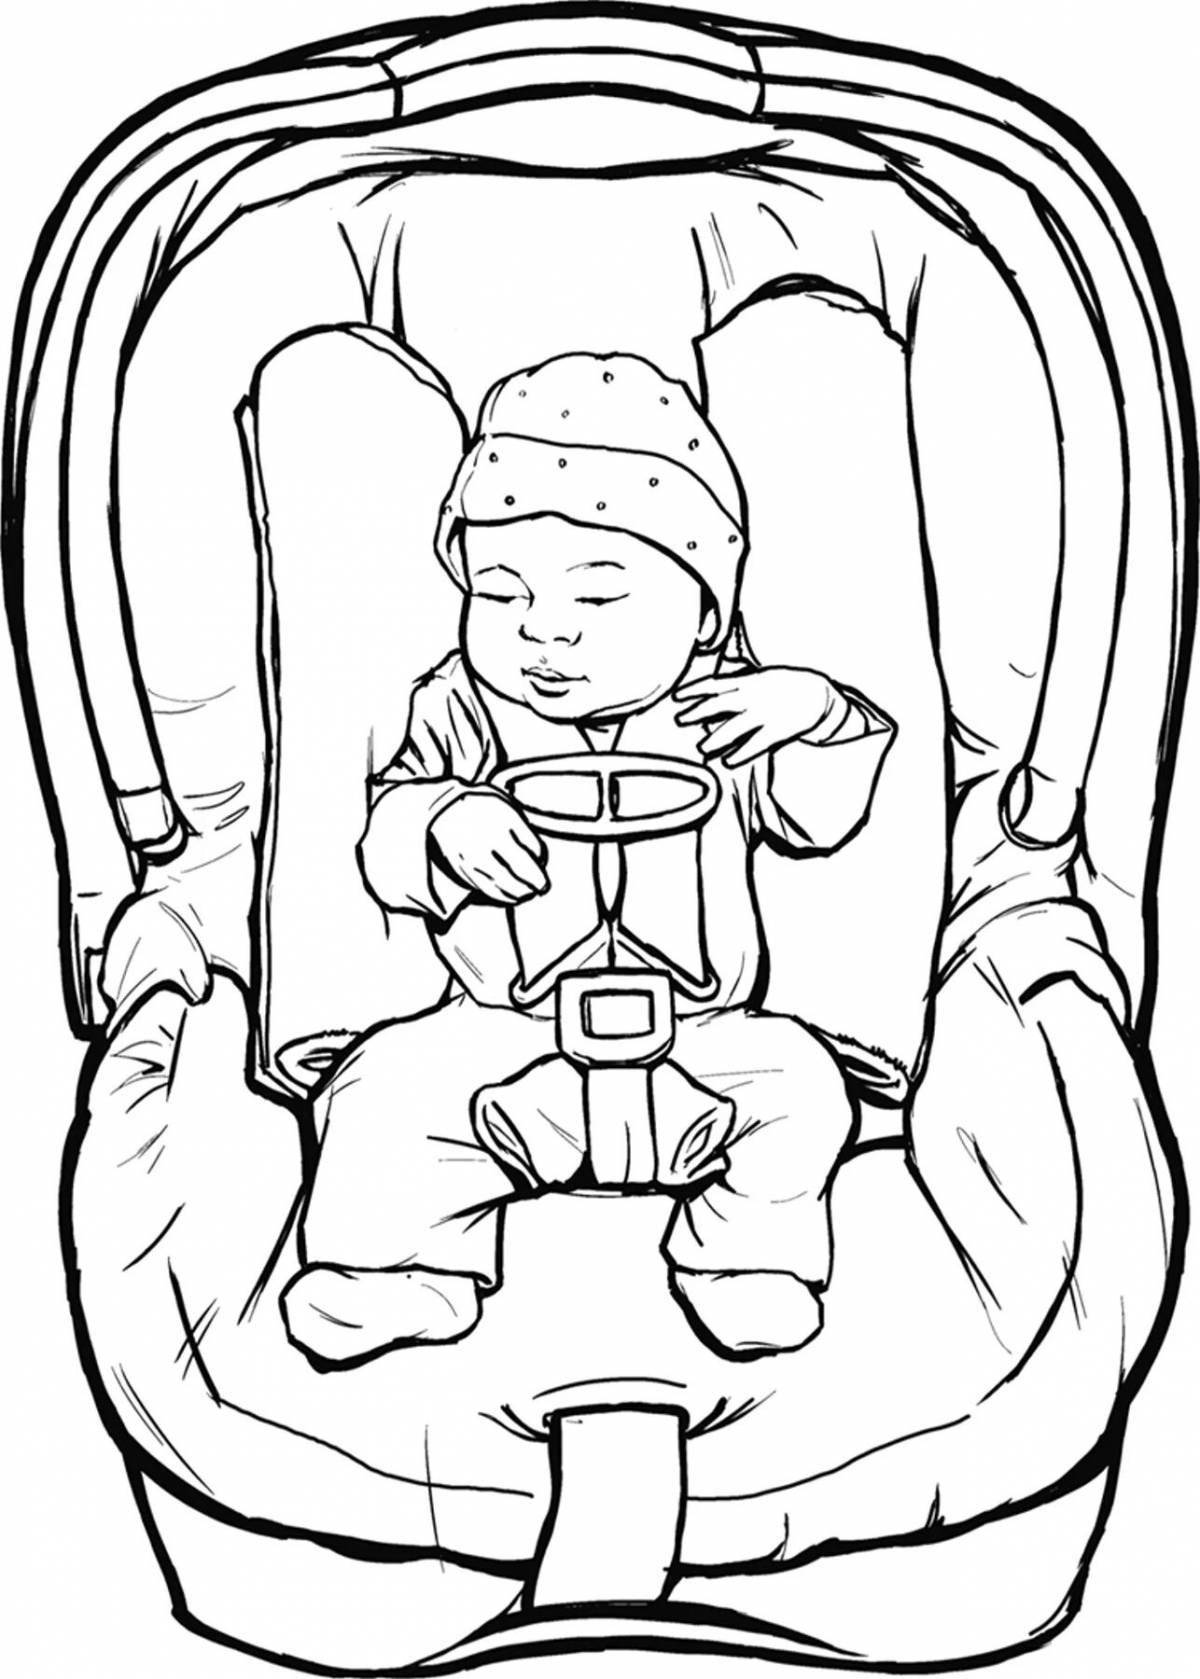 Blissful child in a car seat